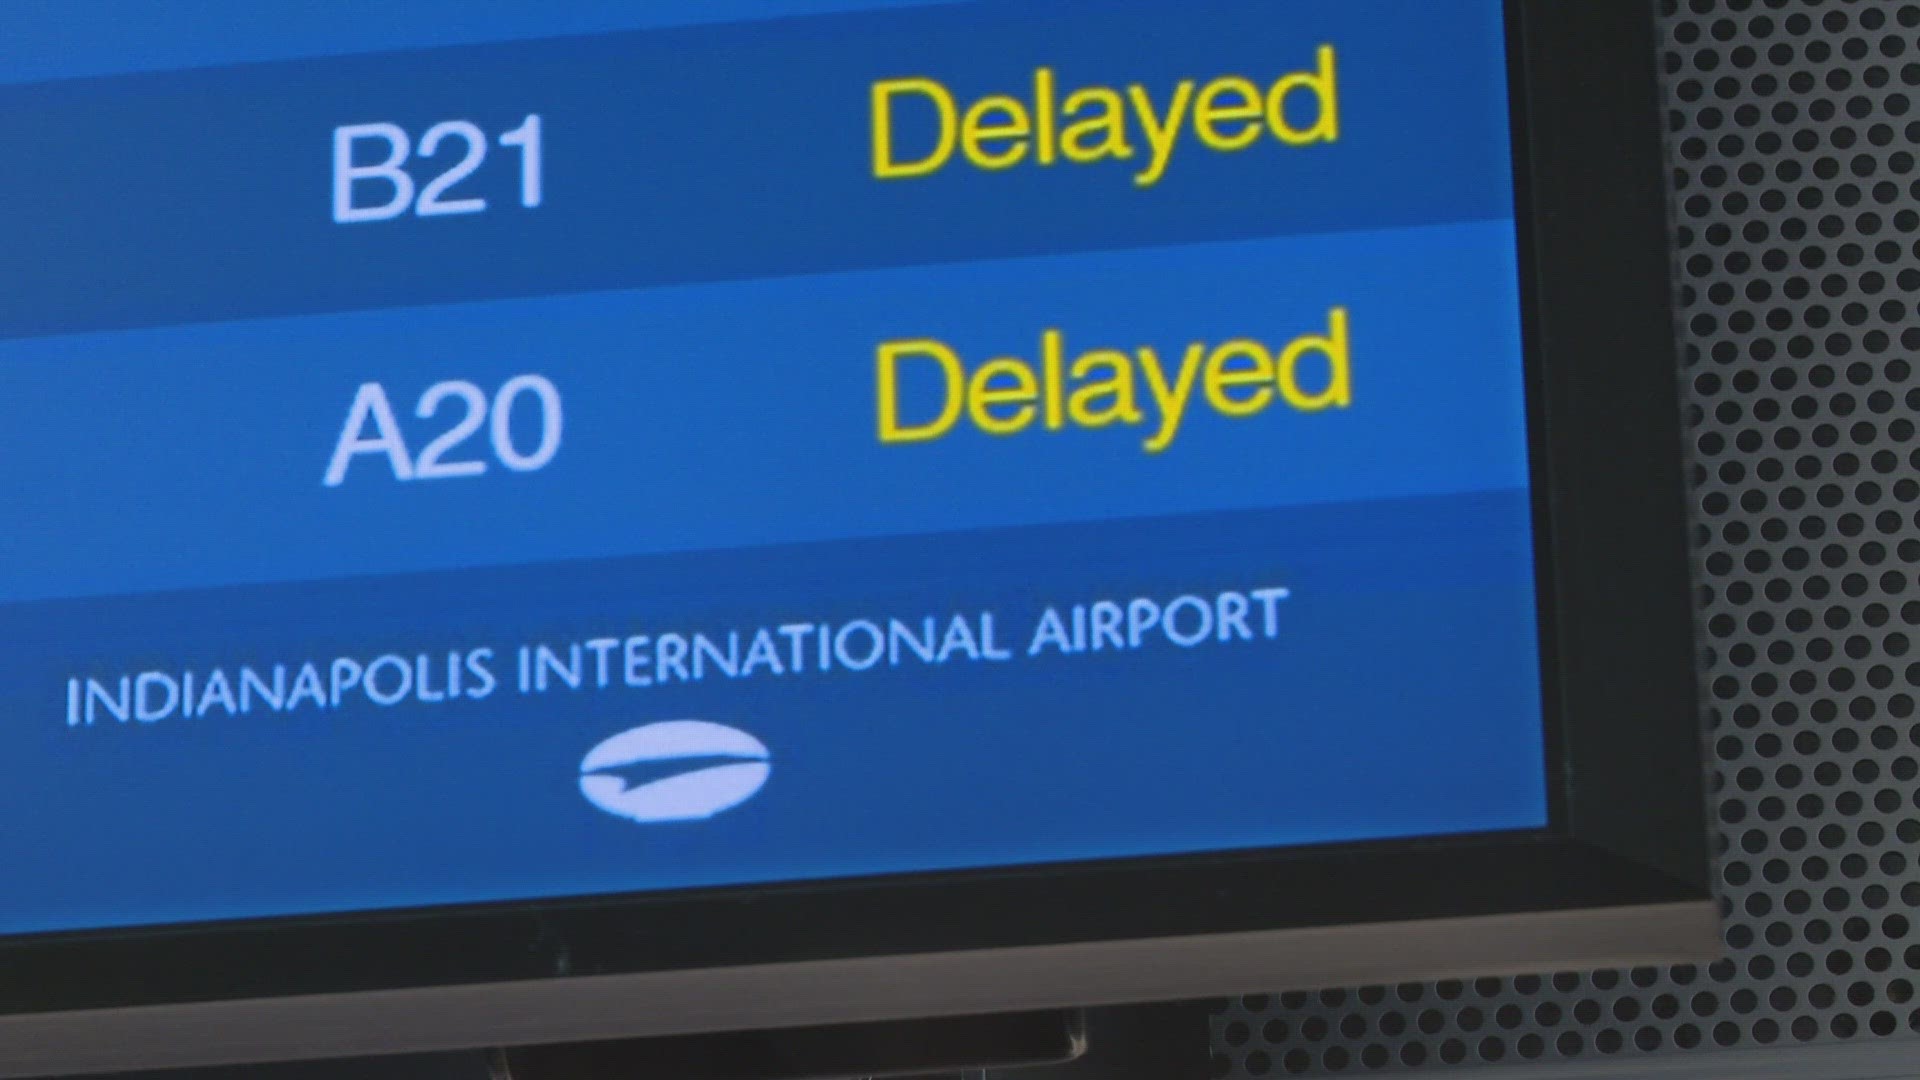 13News reporter Logan Gay reports from the Indianapolis International Airport where several flights were cancelled or delayed on Saturday.